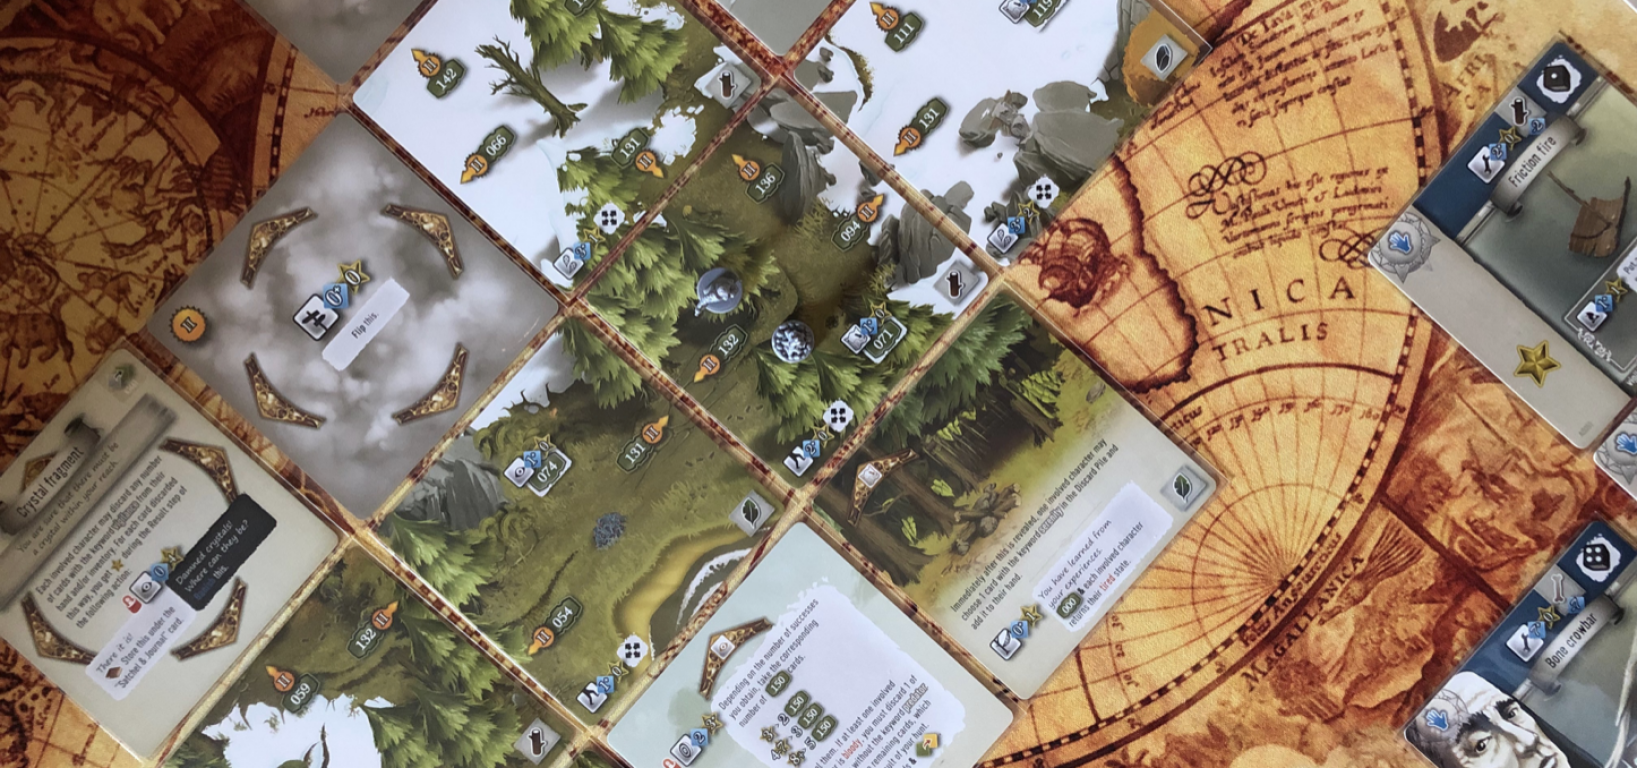 The 7th Continent: The Forbidden Sanctuary gameplay